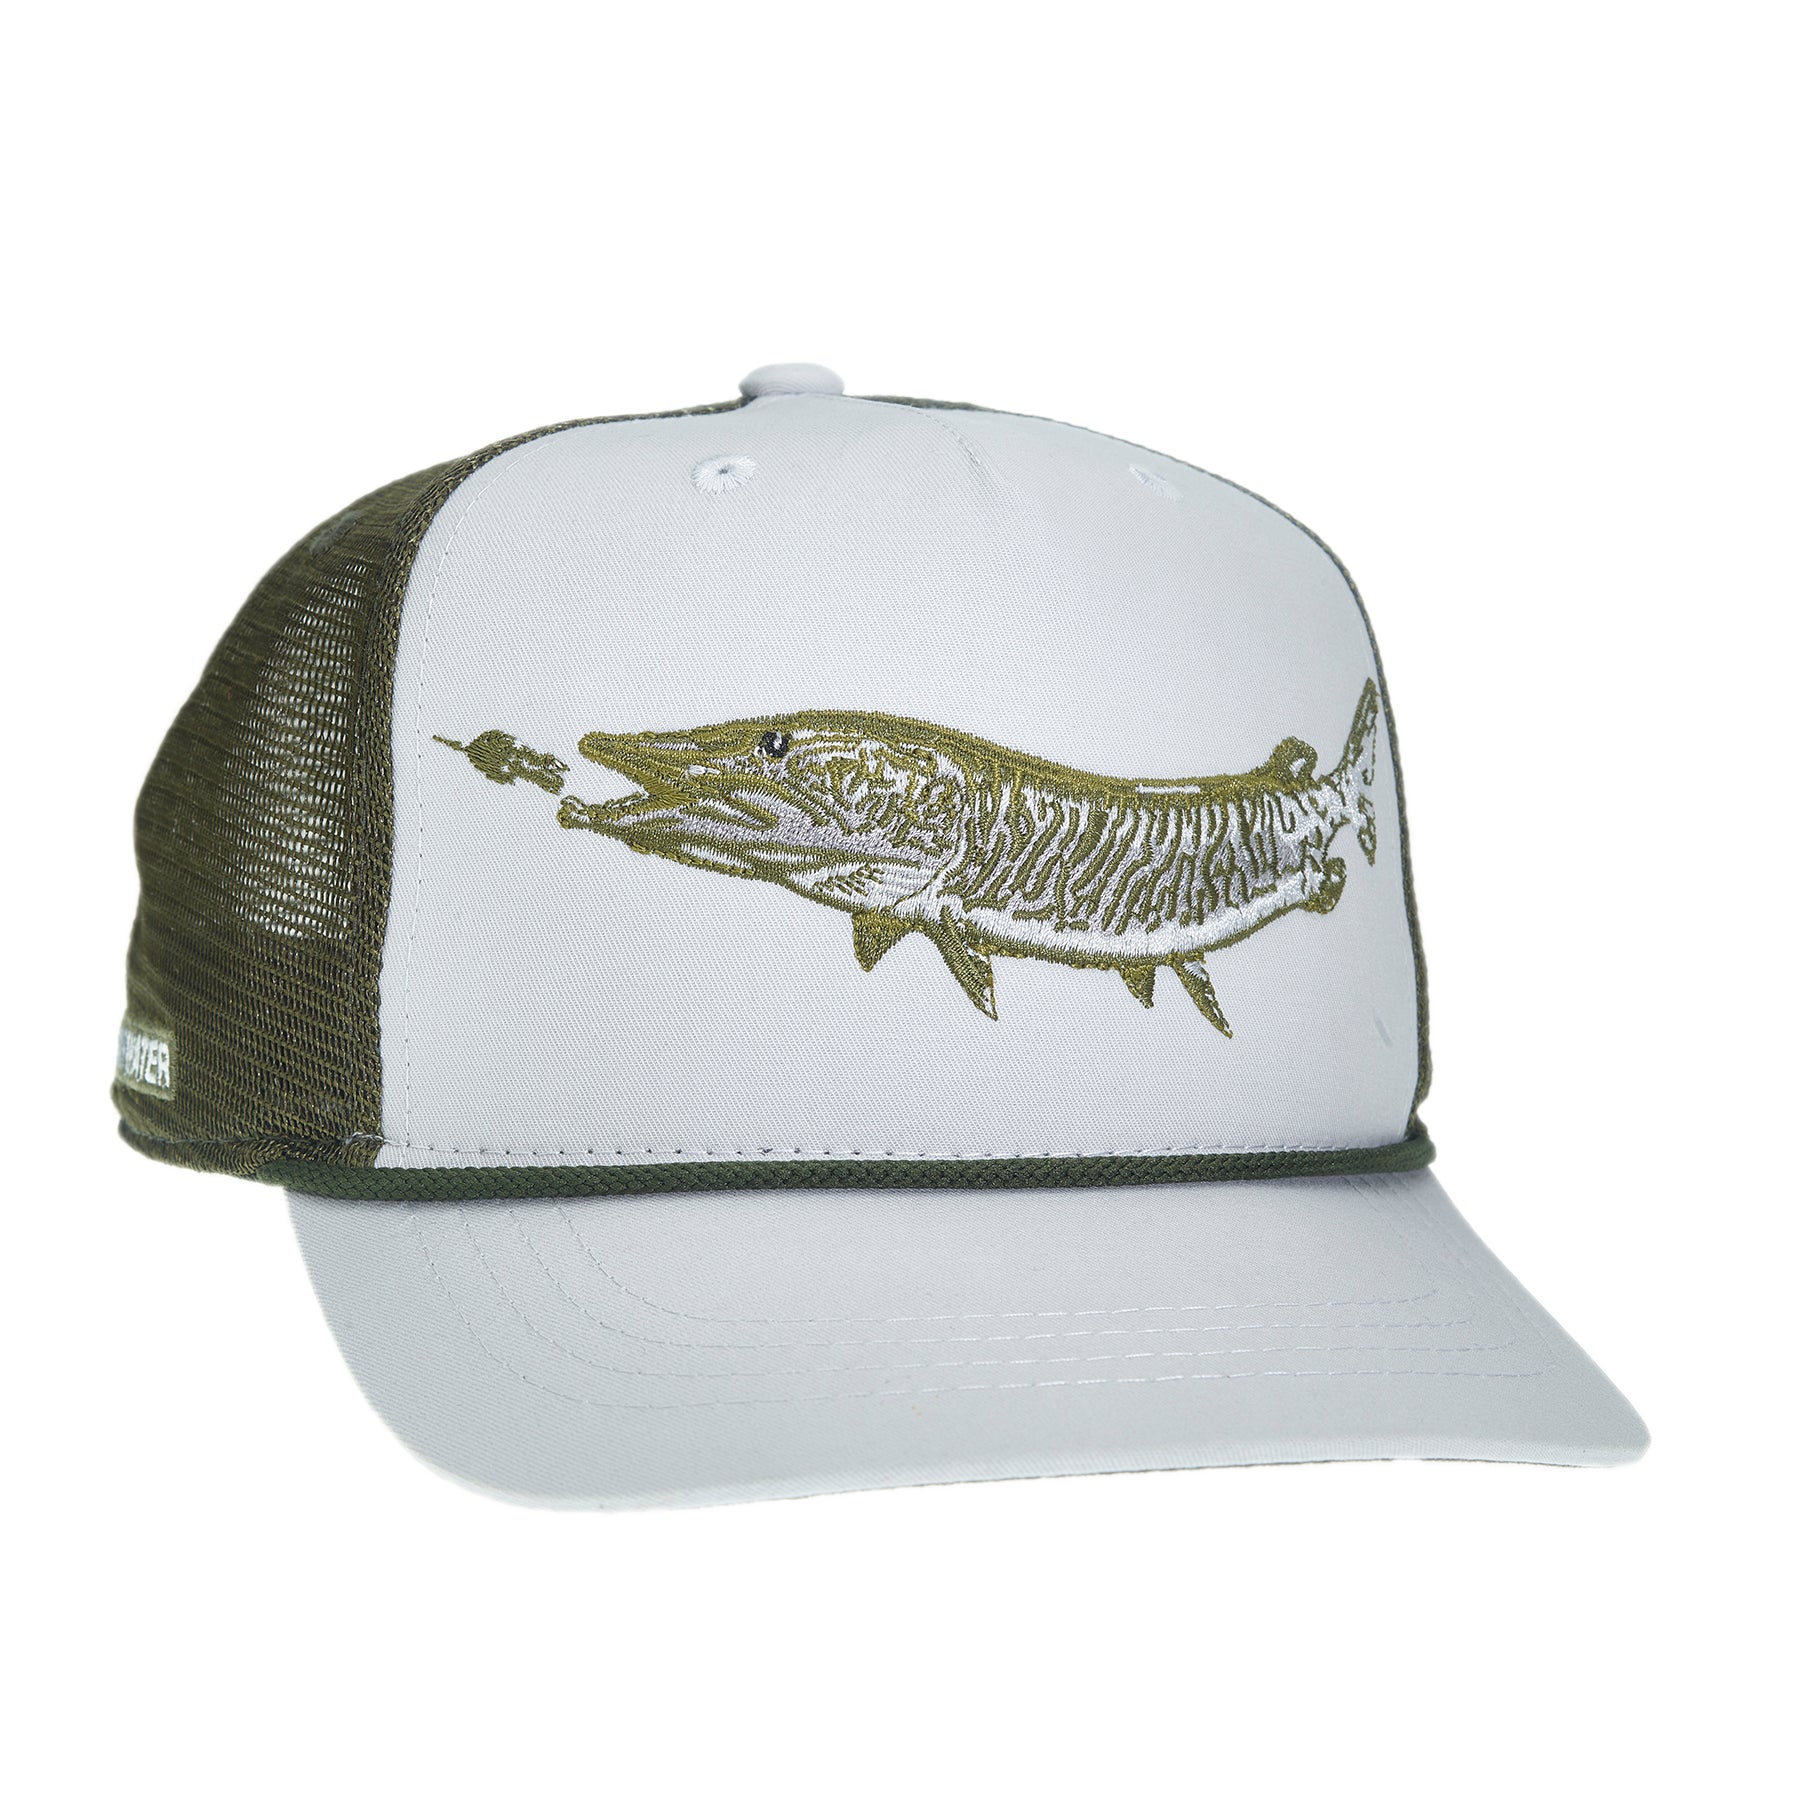 A hat with green mesh in back and gray fabric in front has embroidery of a large musky chasing a fly on front